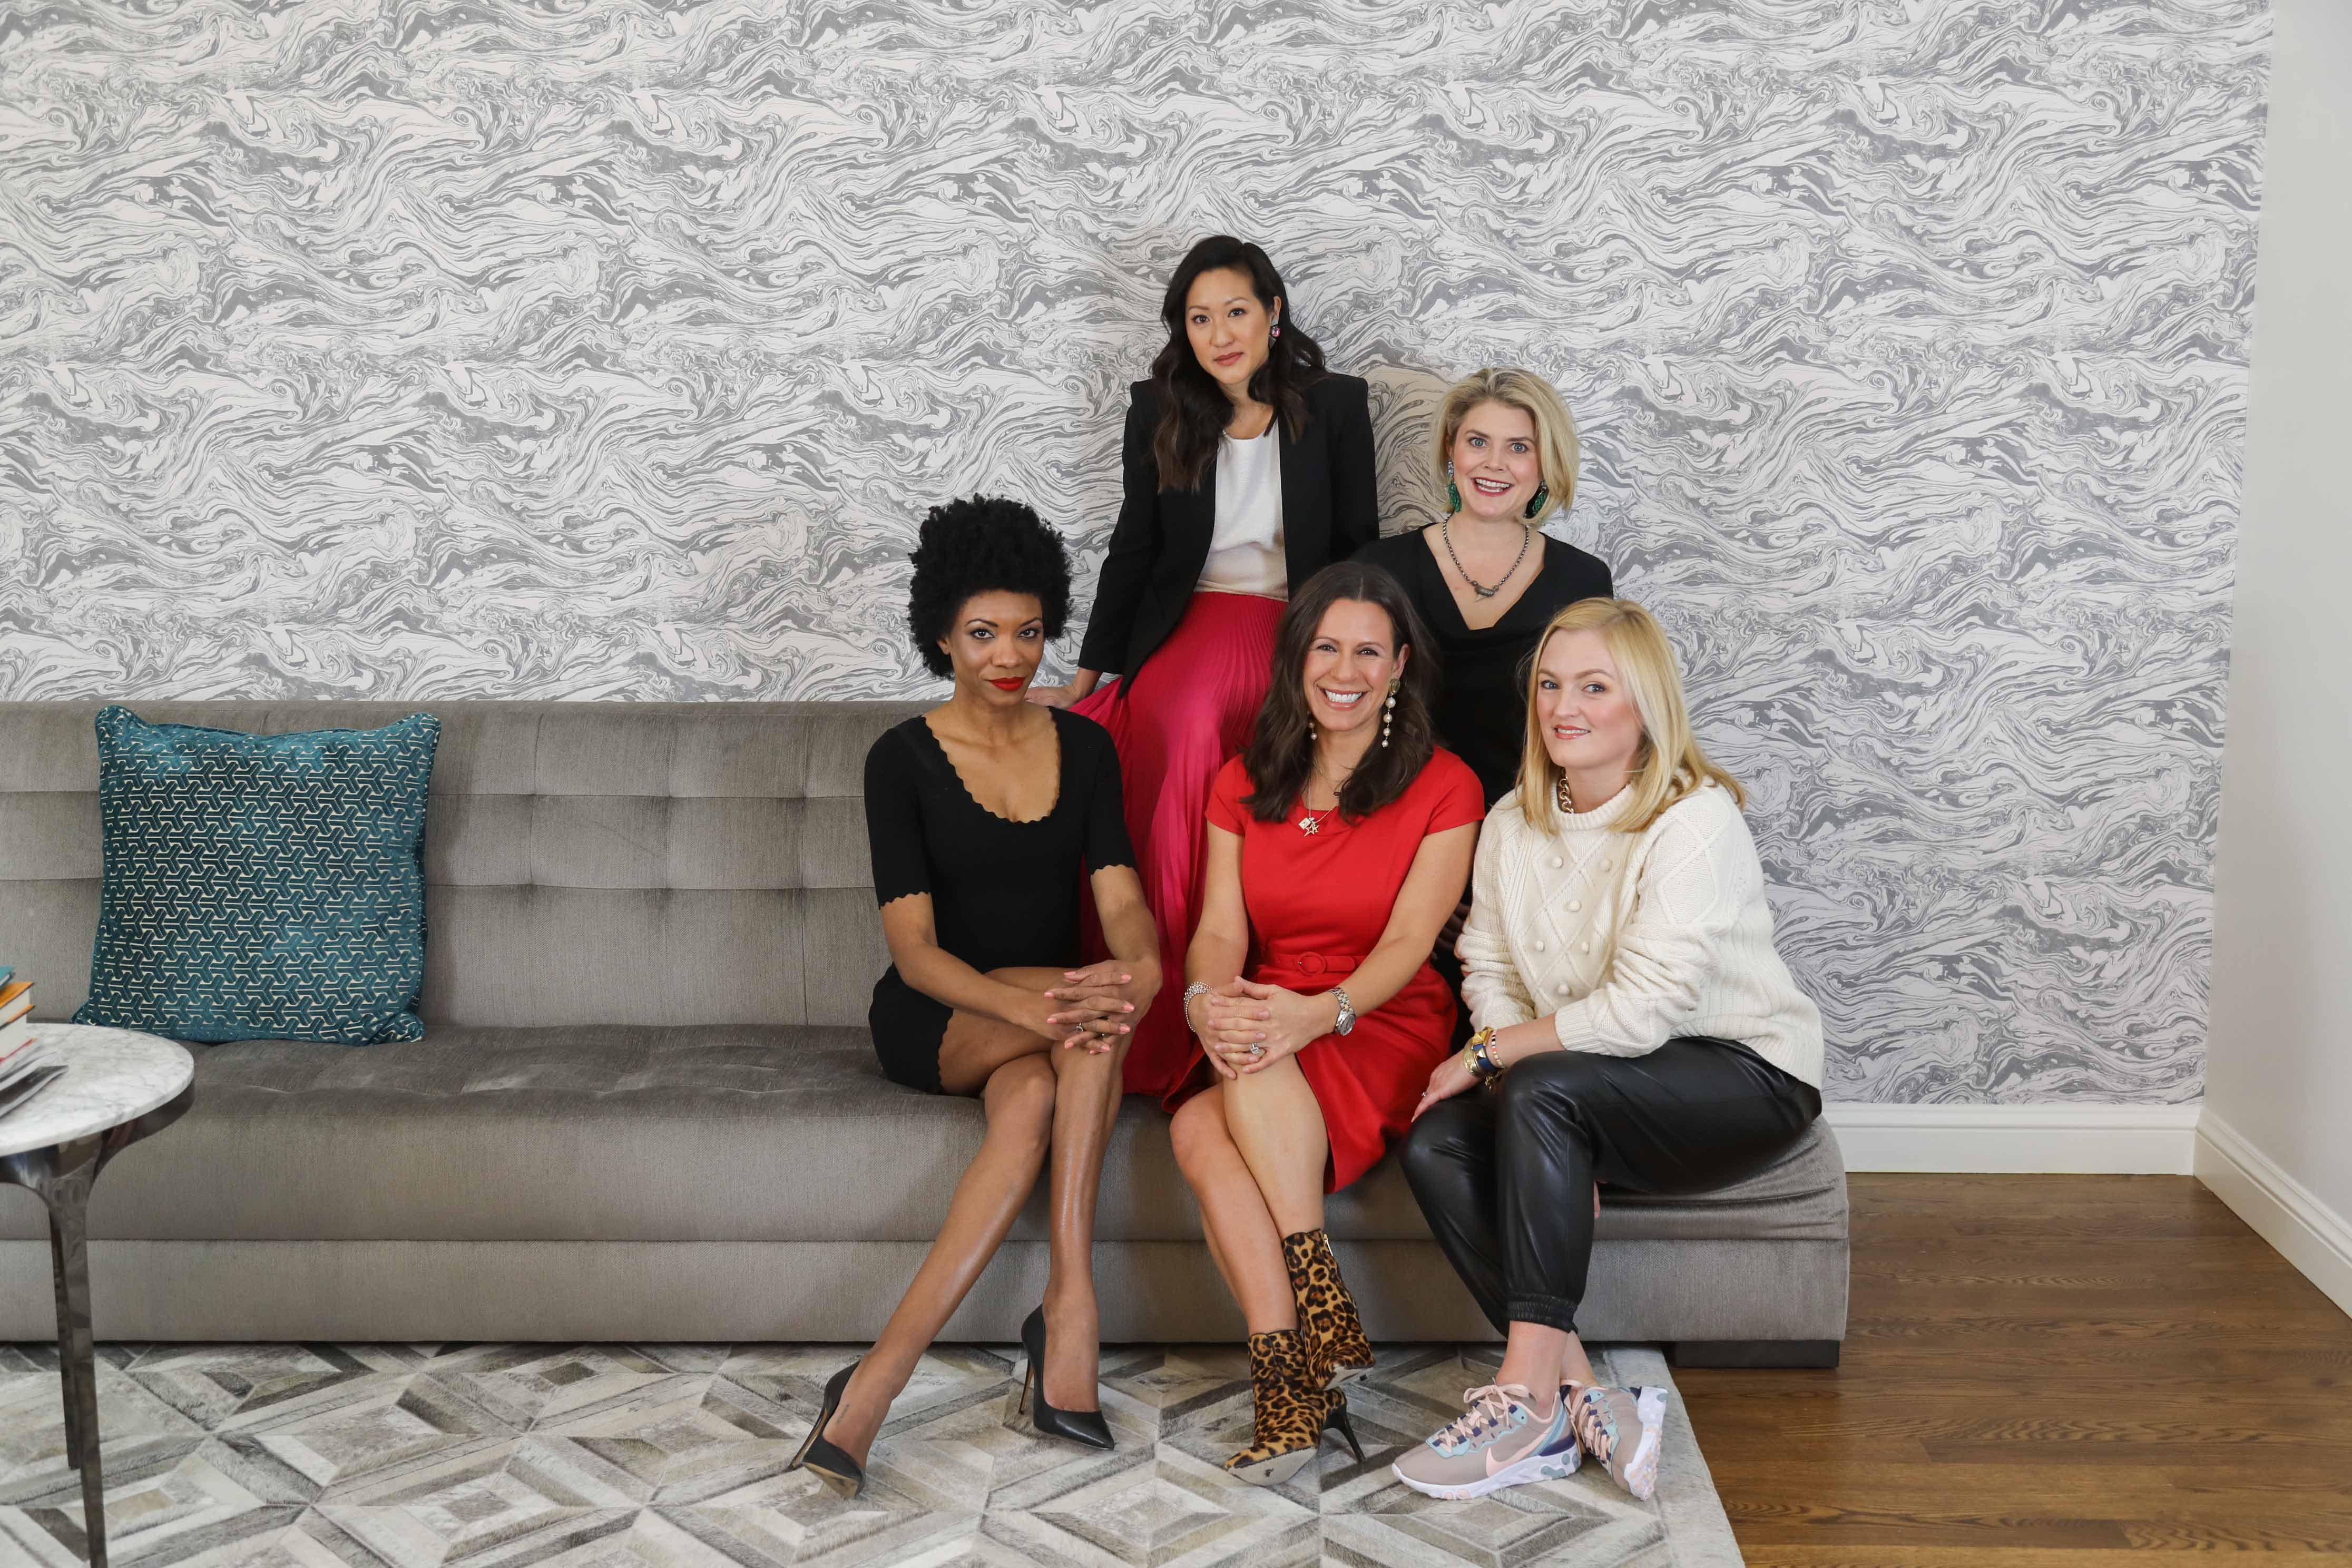 Esther Lee Leach, Annie, Bloj, Leigh Gordon, Larina Chen, Karen Nimmo, Wait, is This Thing On, Denver podcast, podcast, Denver fashion, Denver style, The Bloj Report, LWC Concepts, Cherry Creek Fashion Magazine, female, Denver female podcast, 303 Magazine, 303 Mag, 303 fashion, 303 style, Denver fashion, Denver style, Danielle Webster, Danielle Webster photography, Cheyenne Dickerson